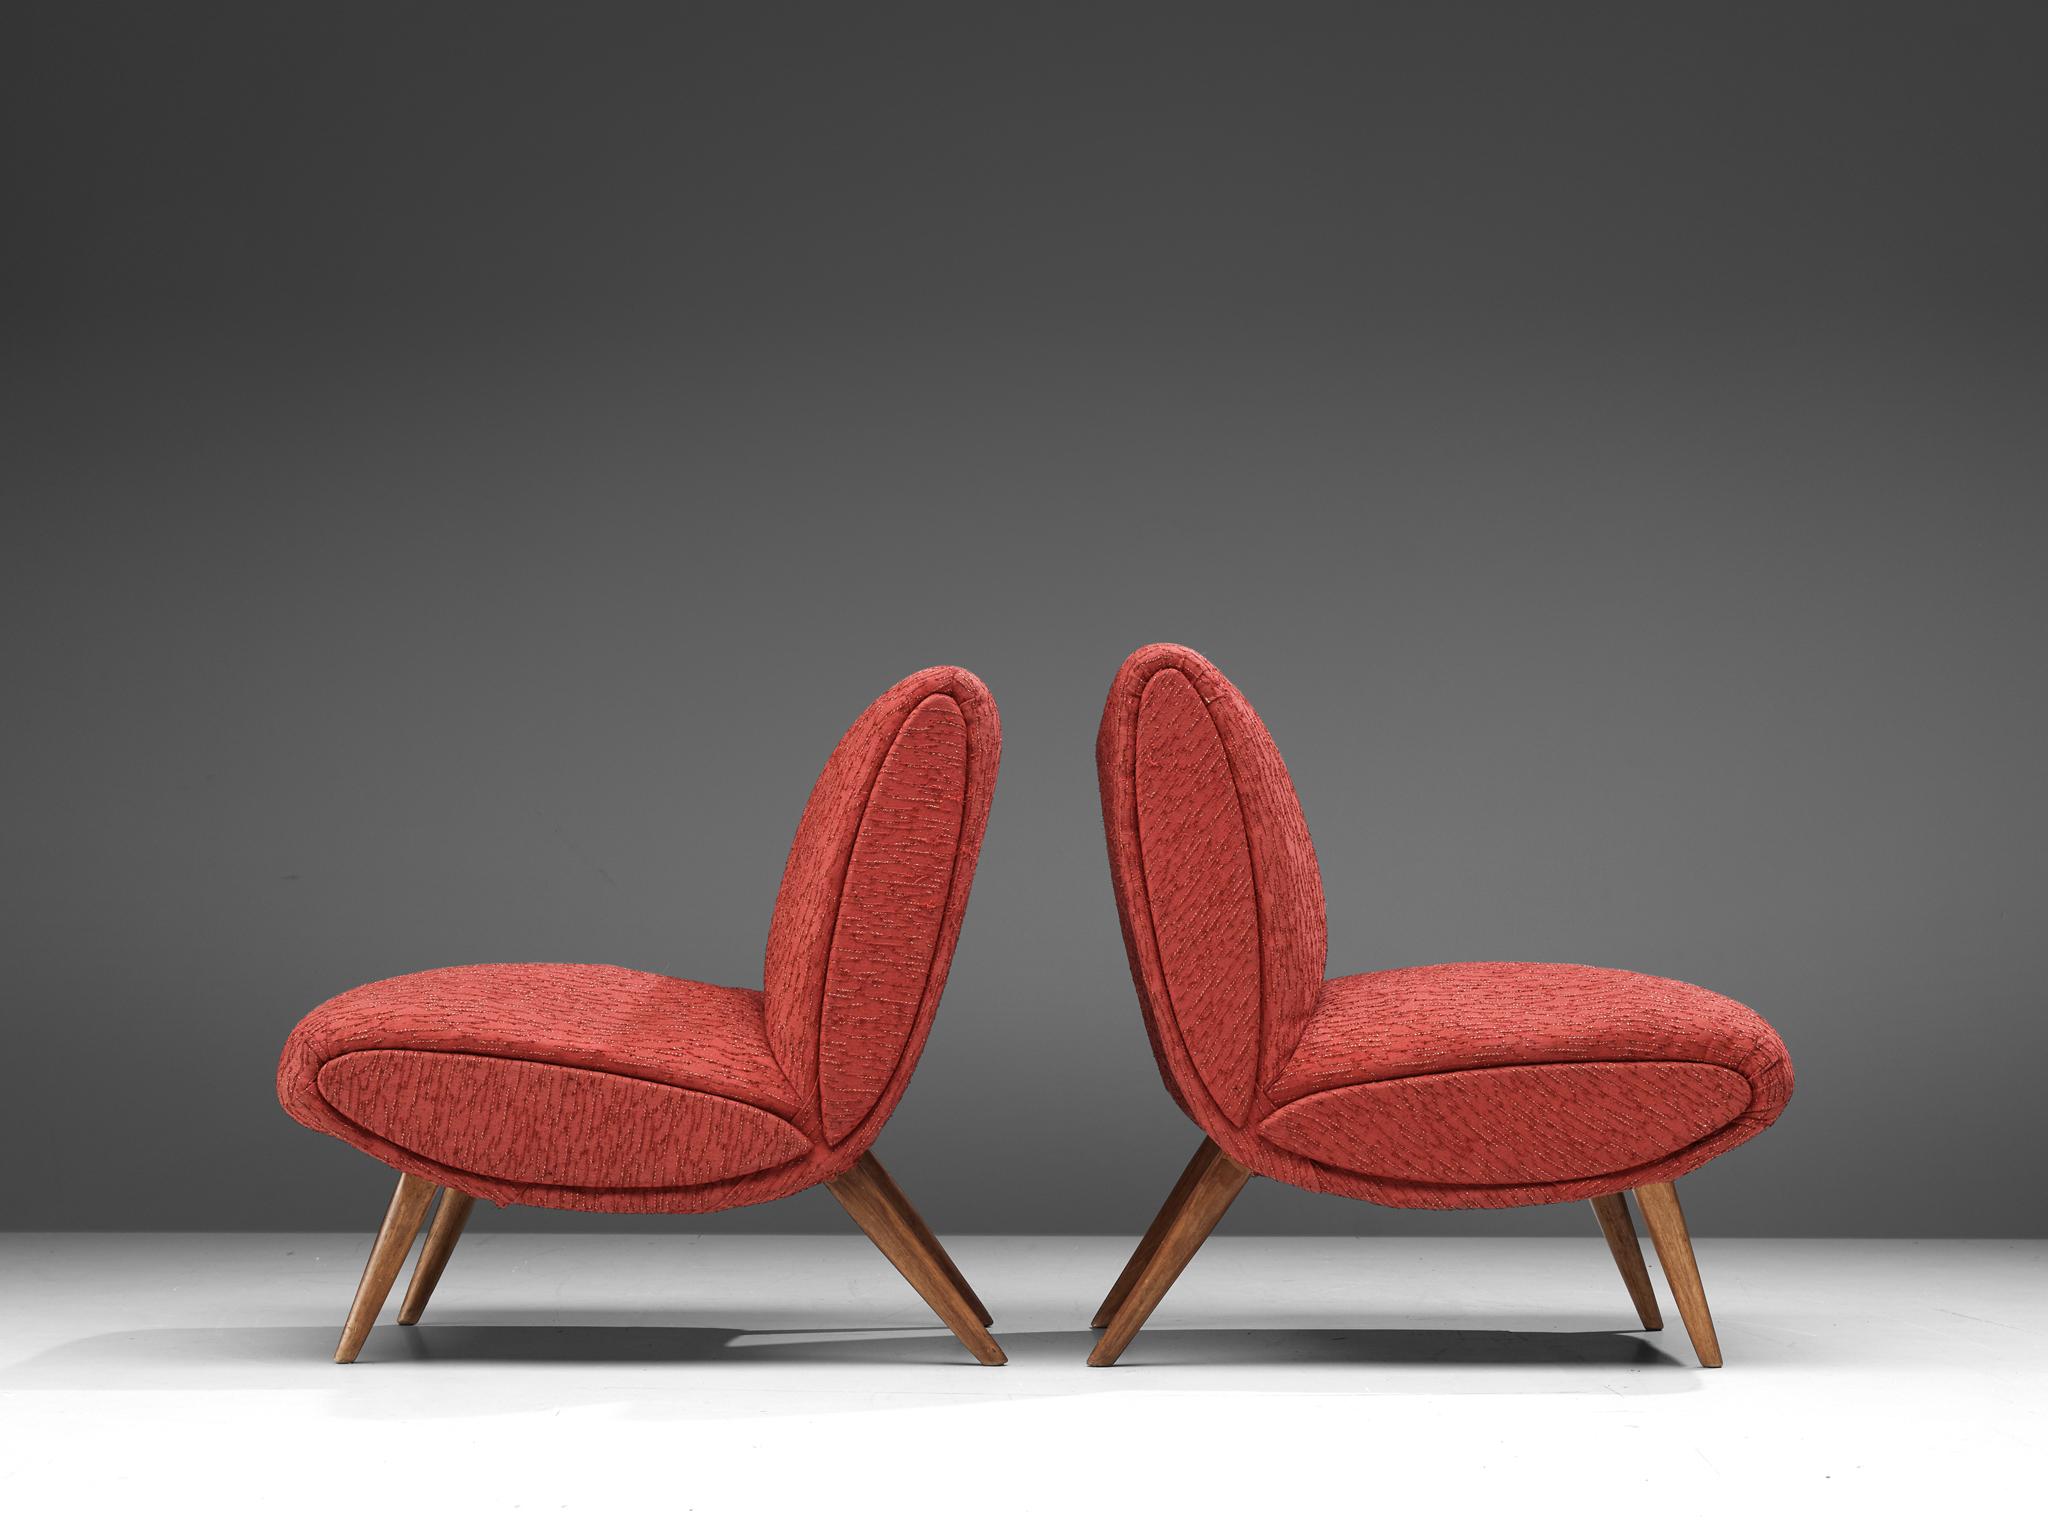 Norman Bel Geddes, pair of lounge chairs, fabric, beech, United States, designed in 1949

Pair of chairs designed by the American Industrial designer Norman Bel Geddes (1893-1958). In his book 'Horizons' (1932), he describes his design philosophy of